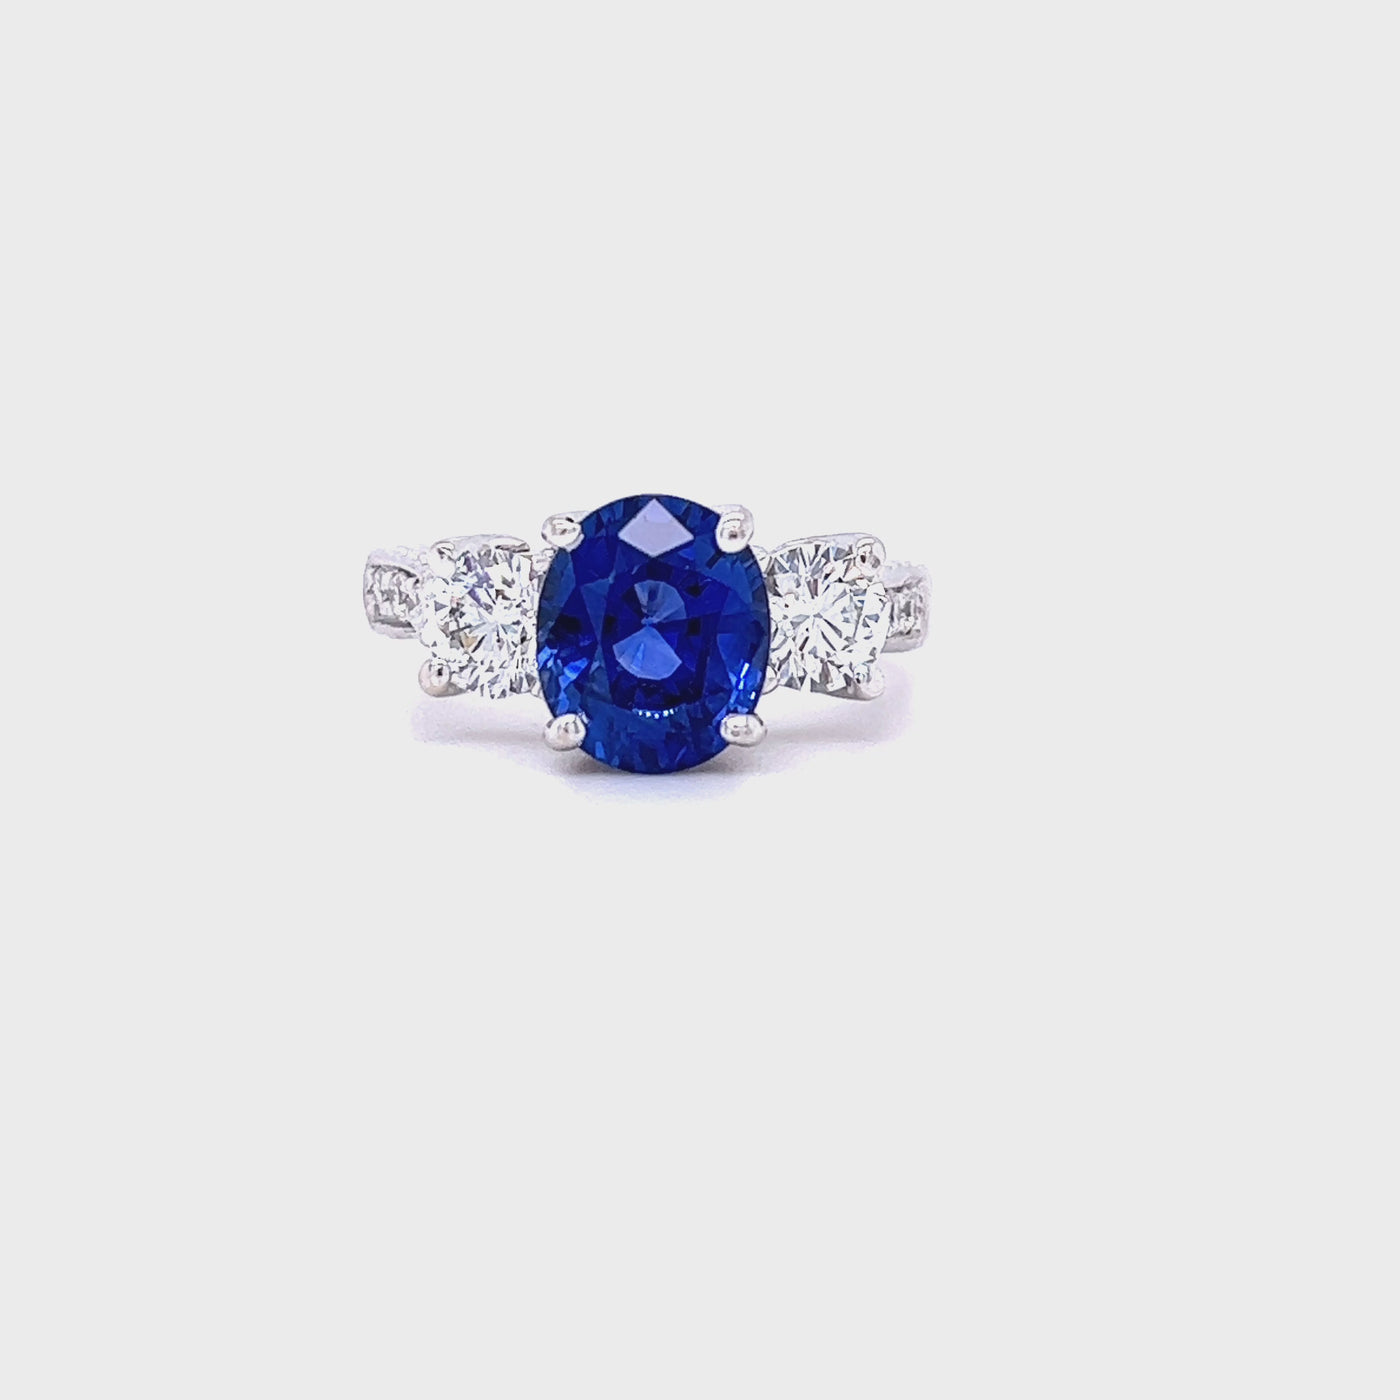 Custom 14k White Gold Oval Sapphire and Diamond Three Stone Ring by Paul Richter